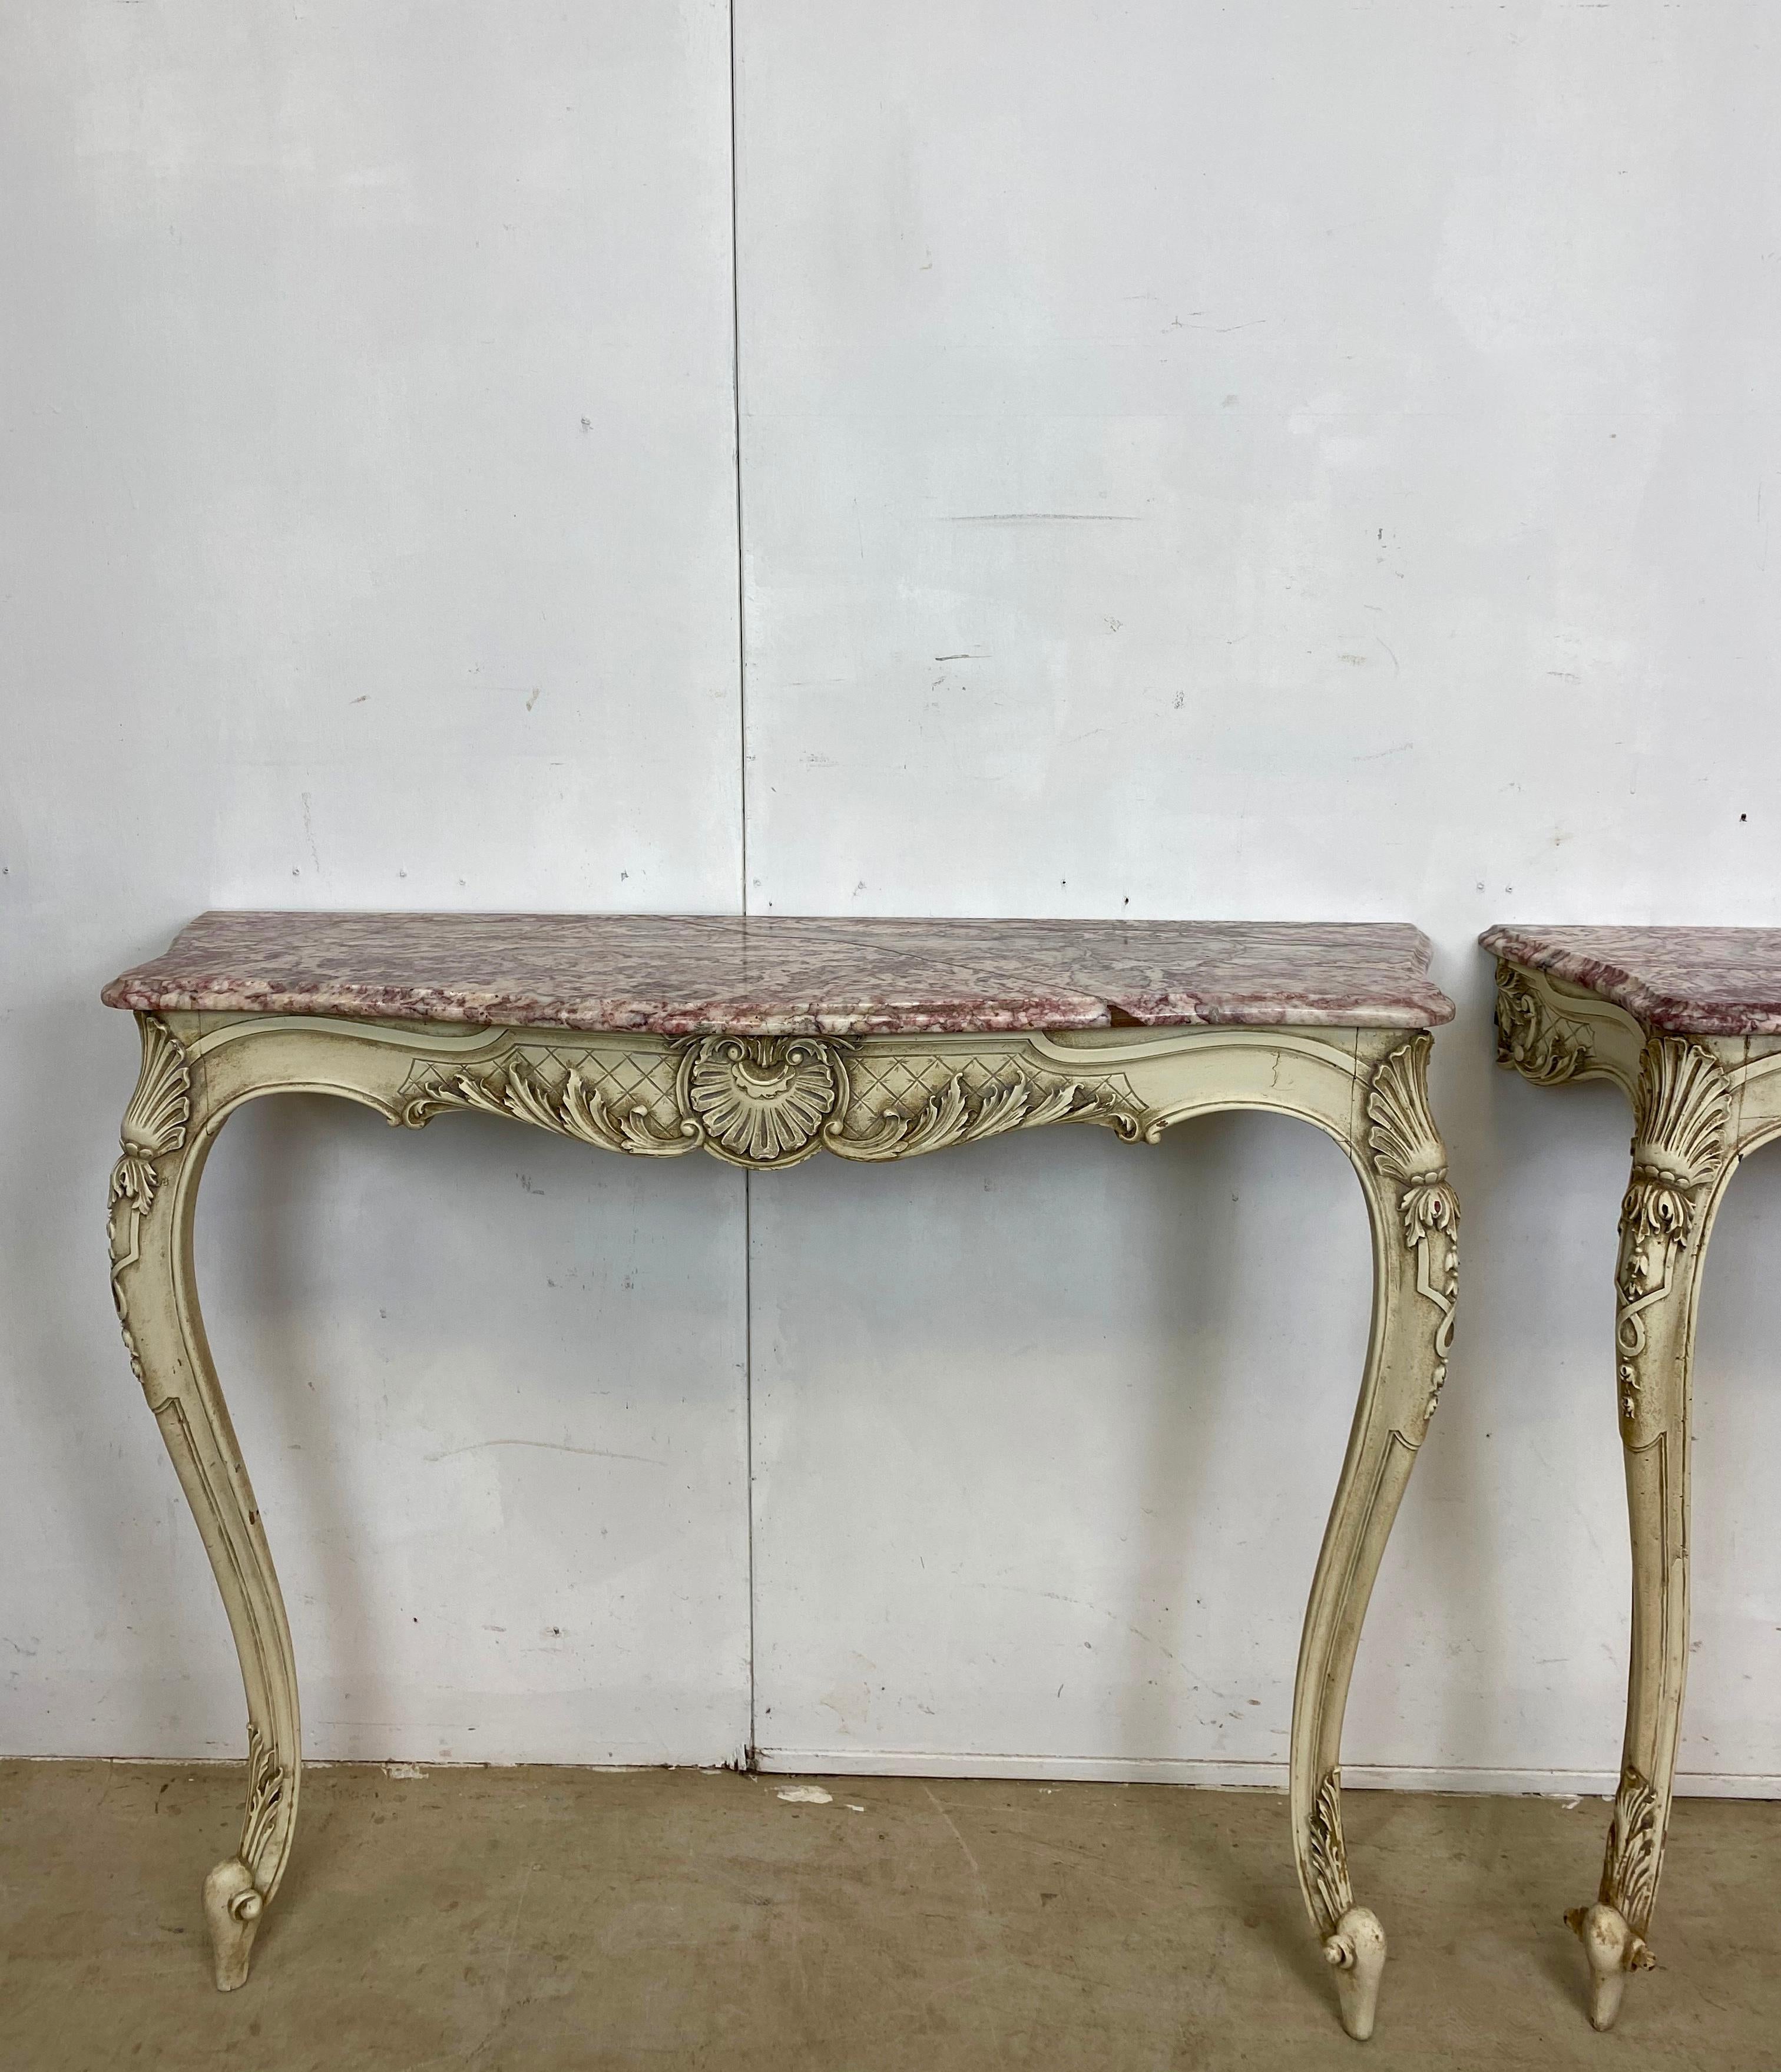 A pair of French console tables with rare and very attractive coloured marble tops. There is nice detail all over these tables. All in their original paint.